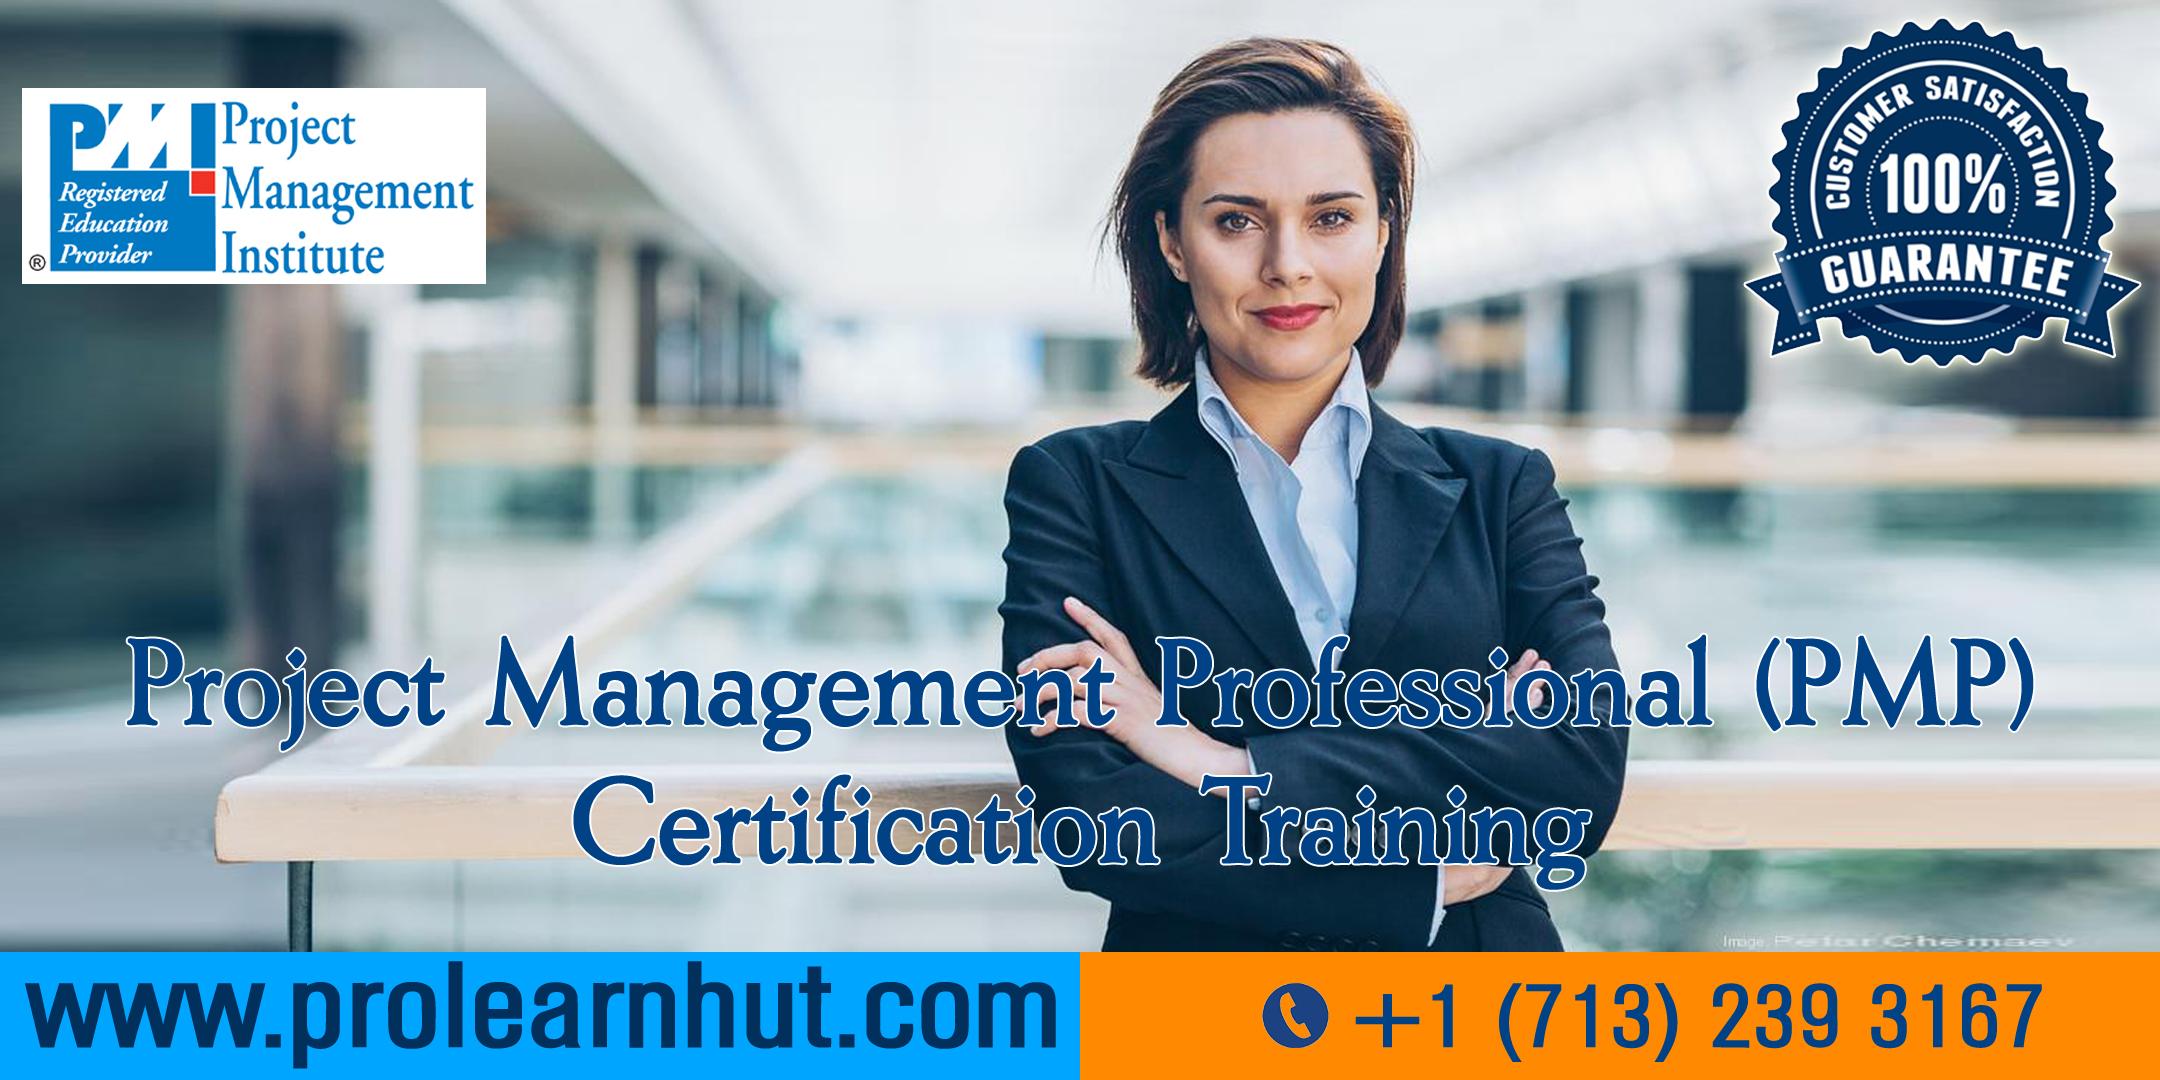 PMP Certification | Project Management Certification| PMP Training in San Francisco, CA | ProLearnHut